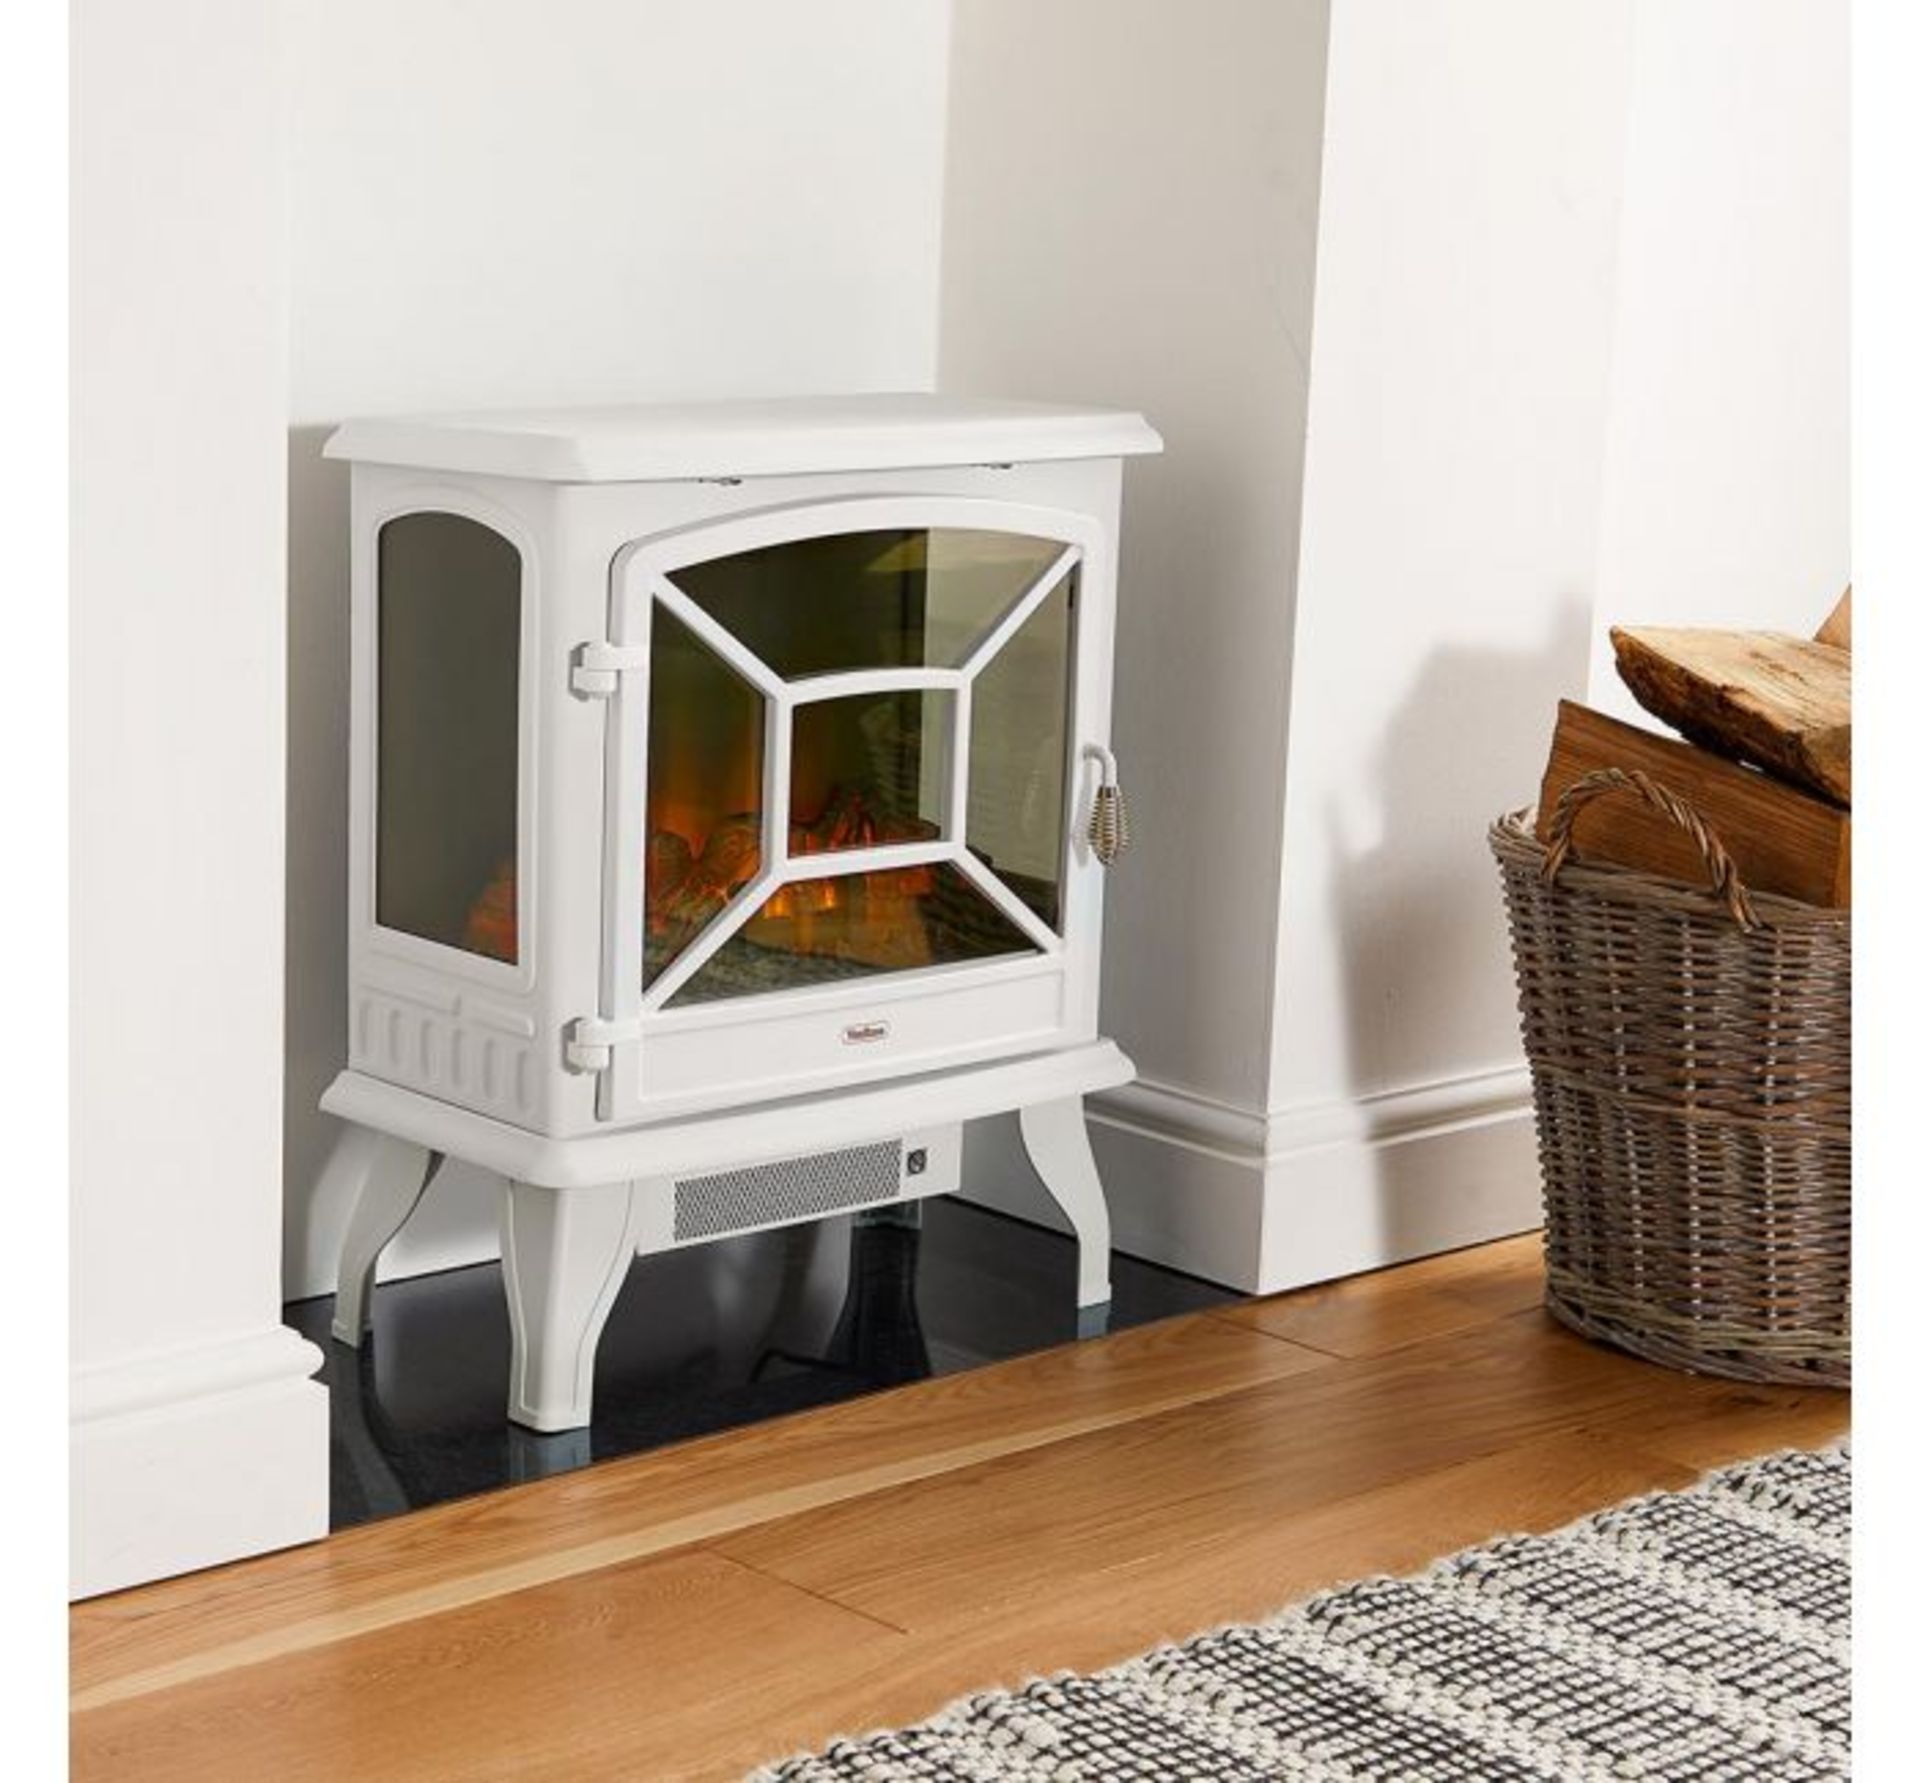 (D15) 1800W White Panoramic Stove Heater Three tempered glass panels offering a panoramic view...